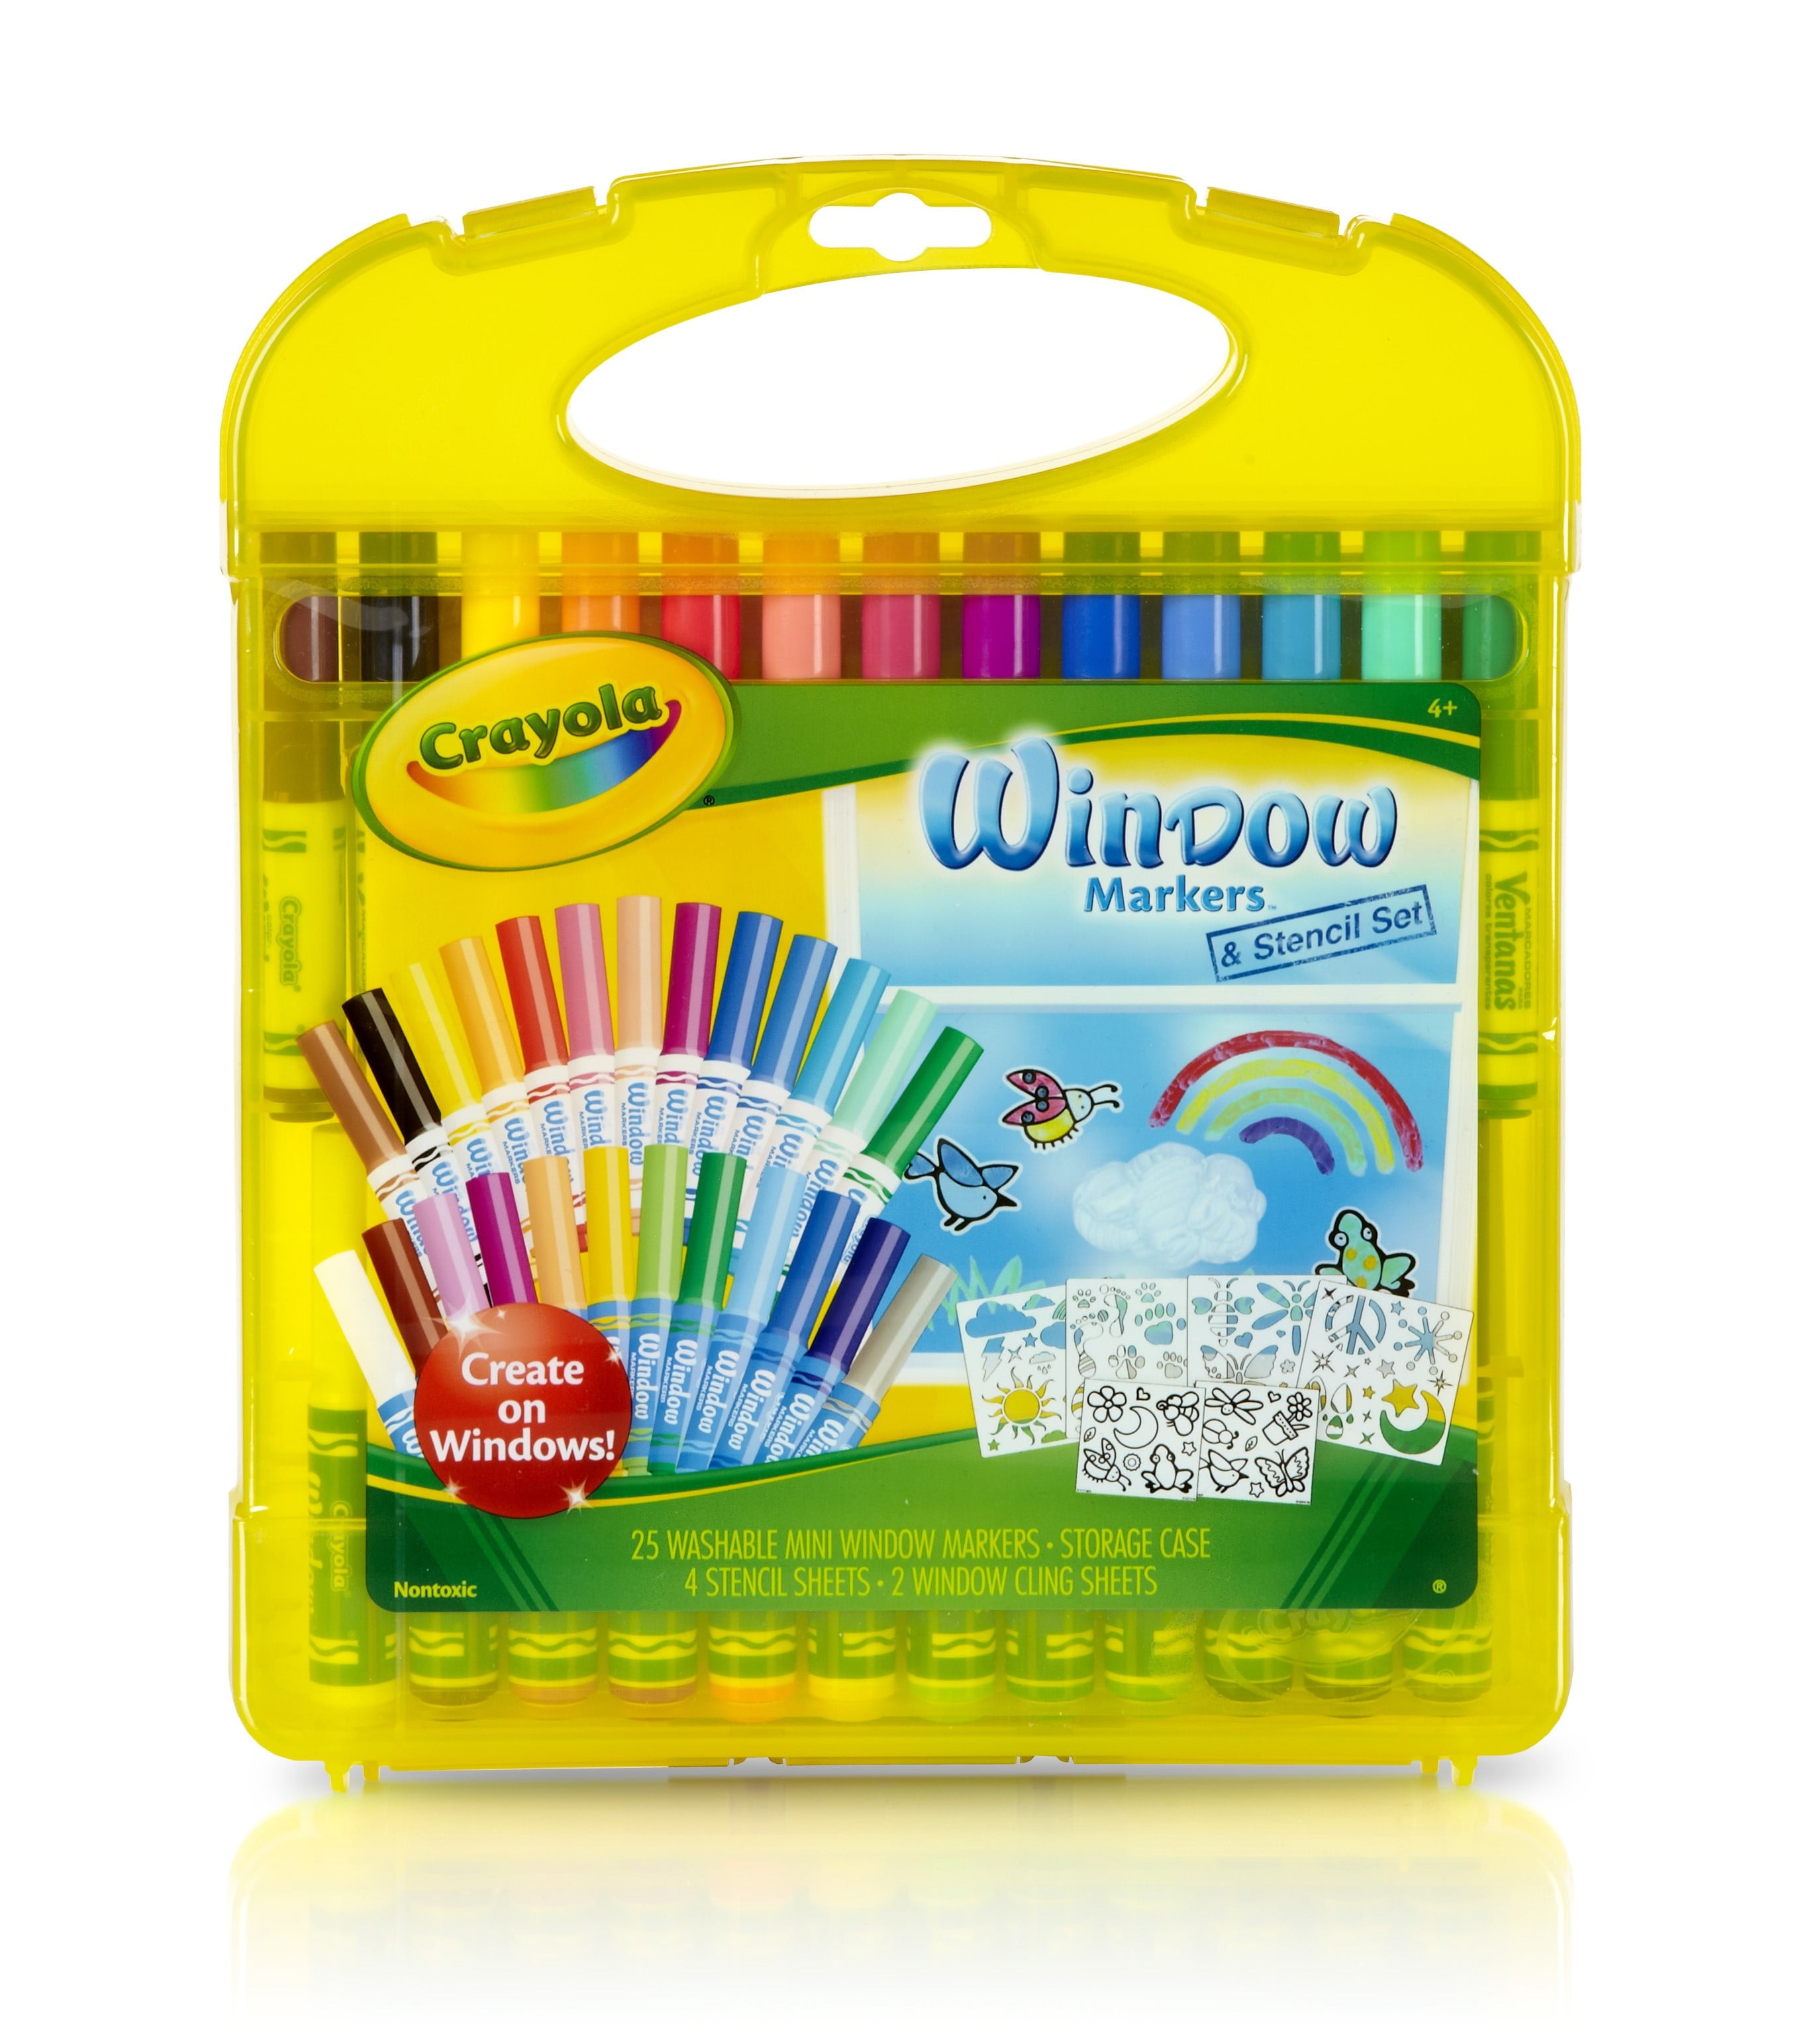  Crayola; Washable Window Markers; Art Tools; 8 Works on All  Glass Surfaces [Set of 3] : Toys & Games